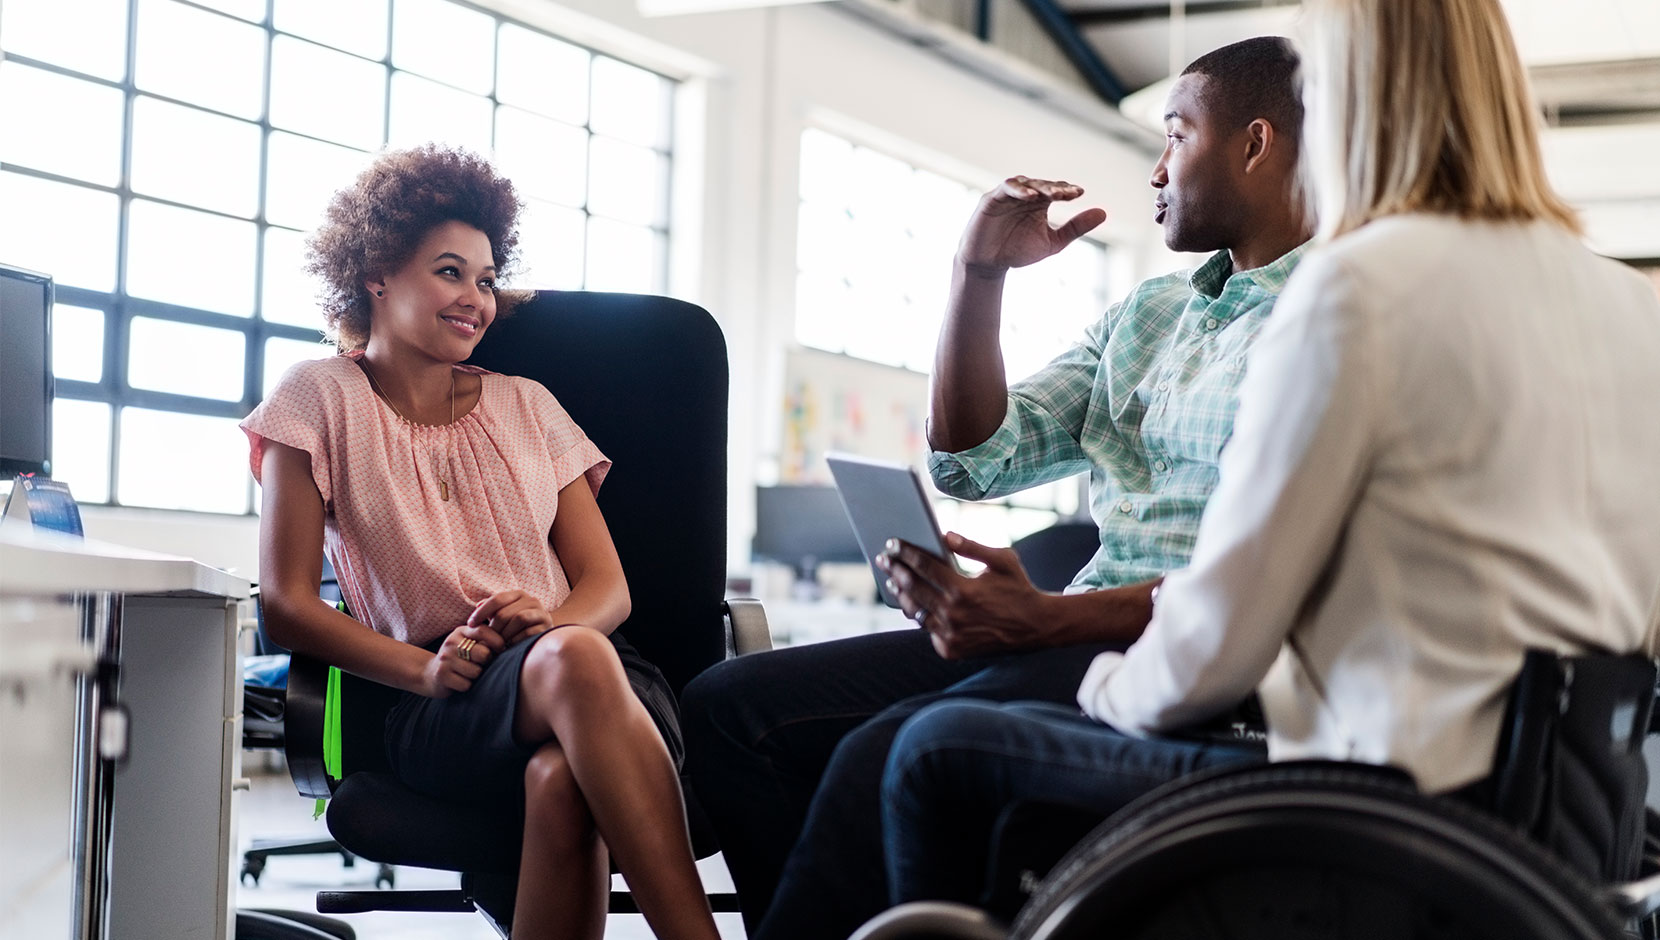 Three colleagues in an open plan workspace, conversing in a circle. Two are people of colour, and one is a white person in a manual wheelchair. They are all wearing casual business attire.